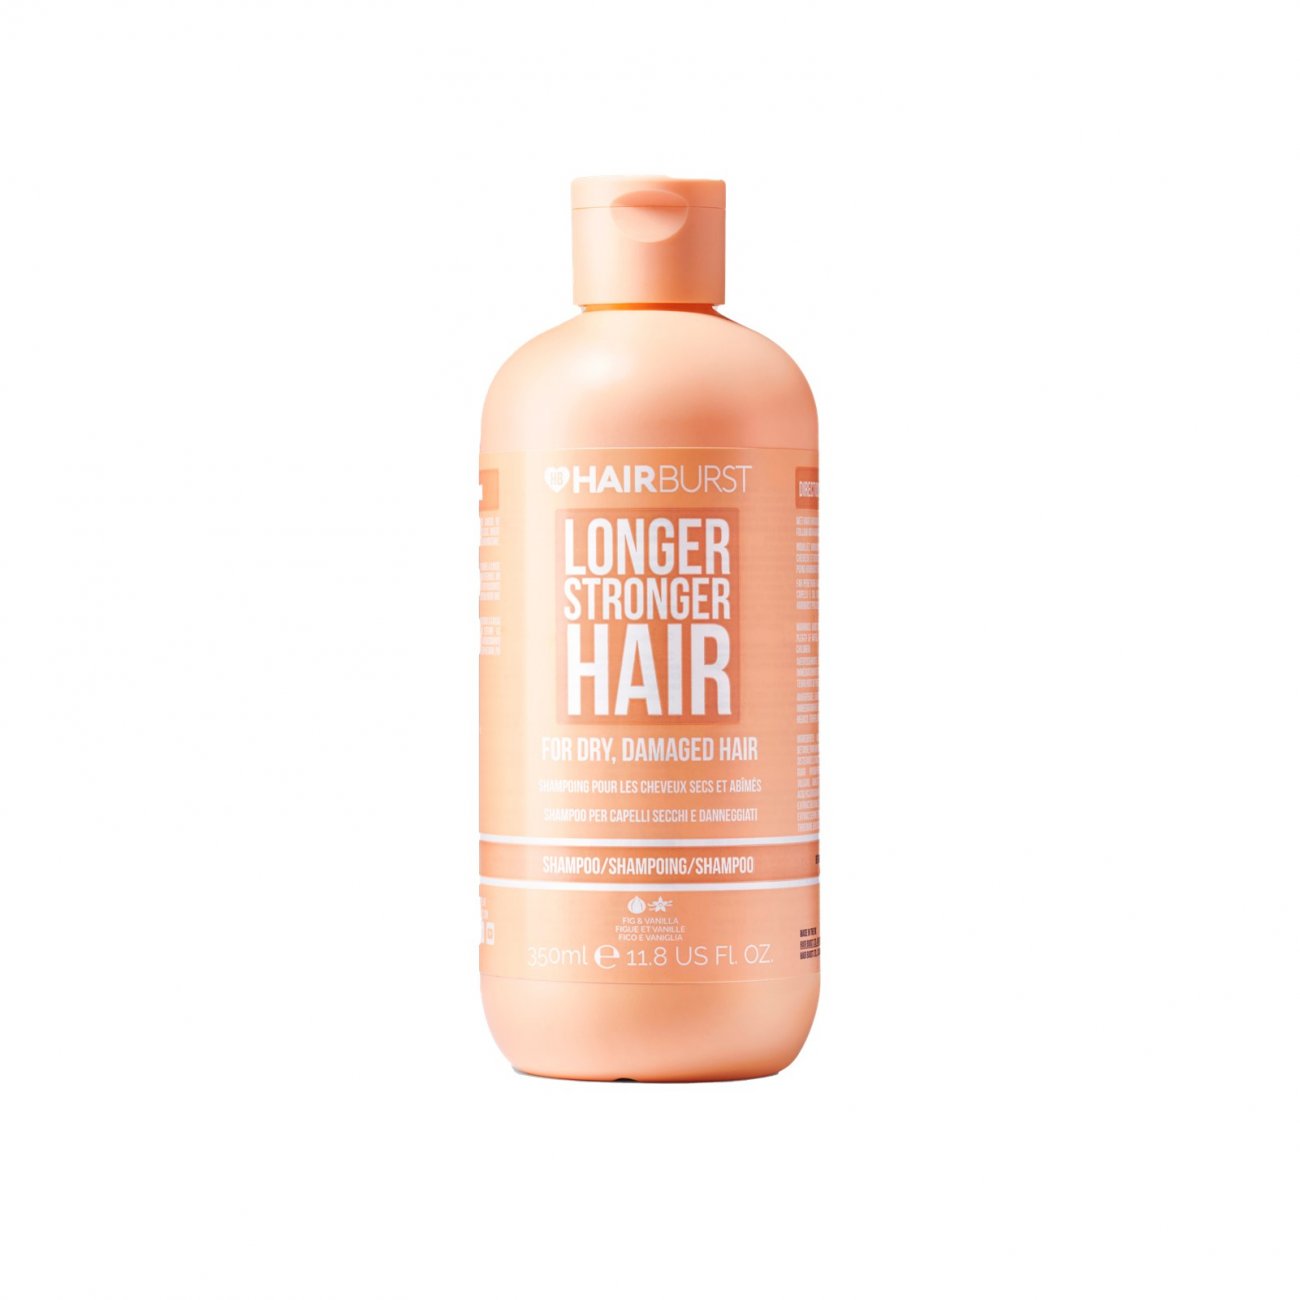 10 Best Shampoos For Damaged Hair In 2023